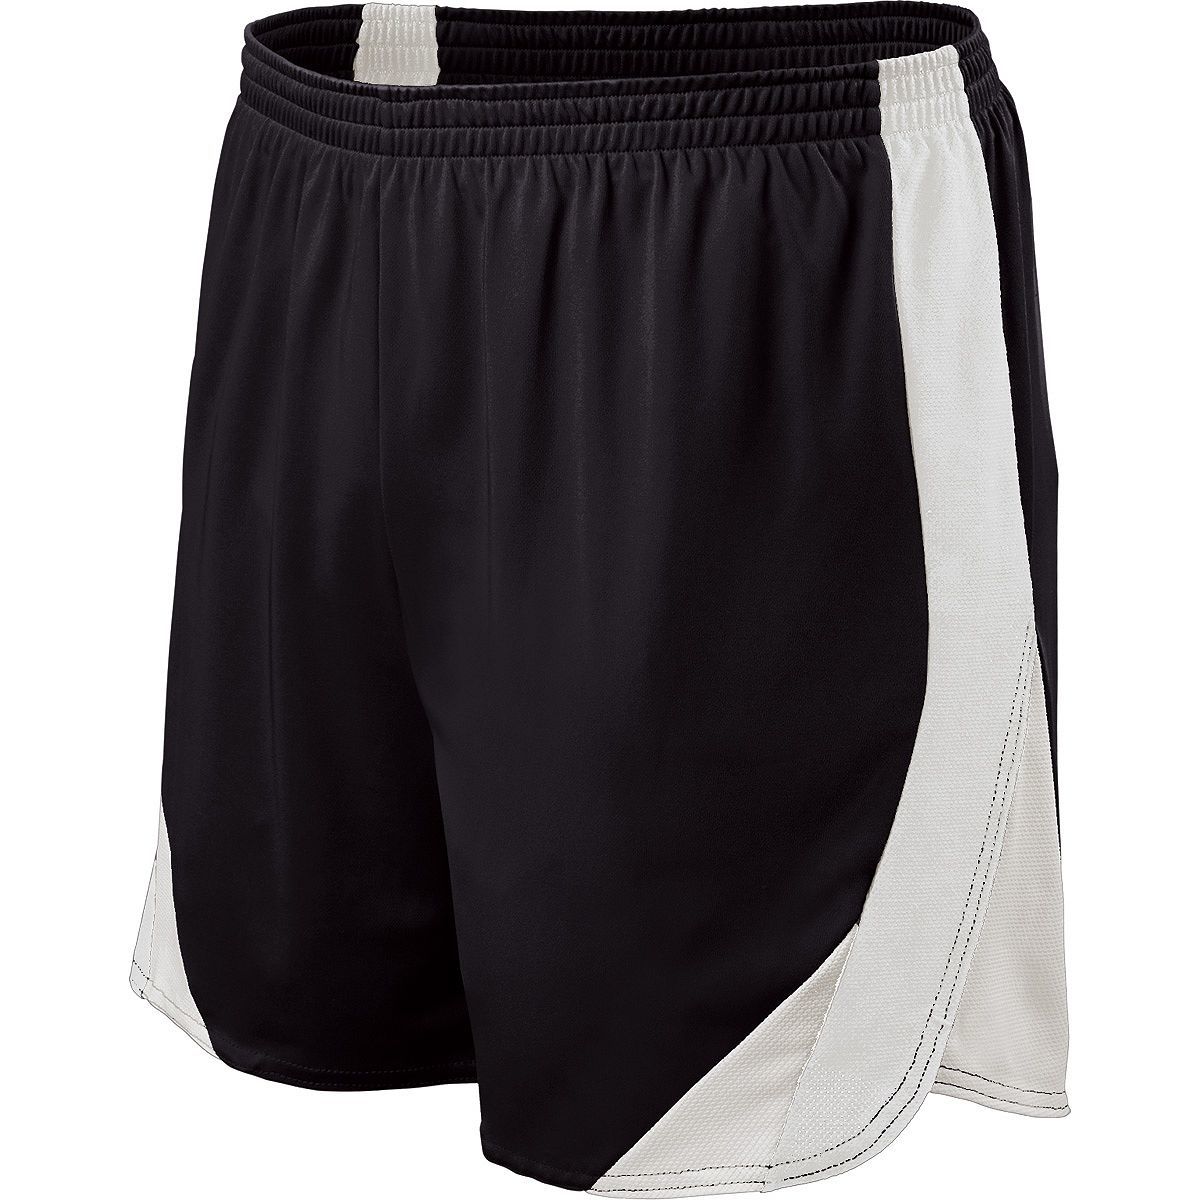 Holloway Approach Shorts in Black/White/White  -Part of the Adult, Adult-Shorts, Track-Field, Holloway product lines at KanaleyCreations.com